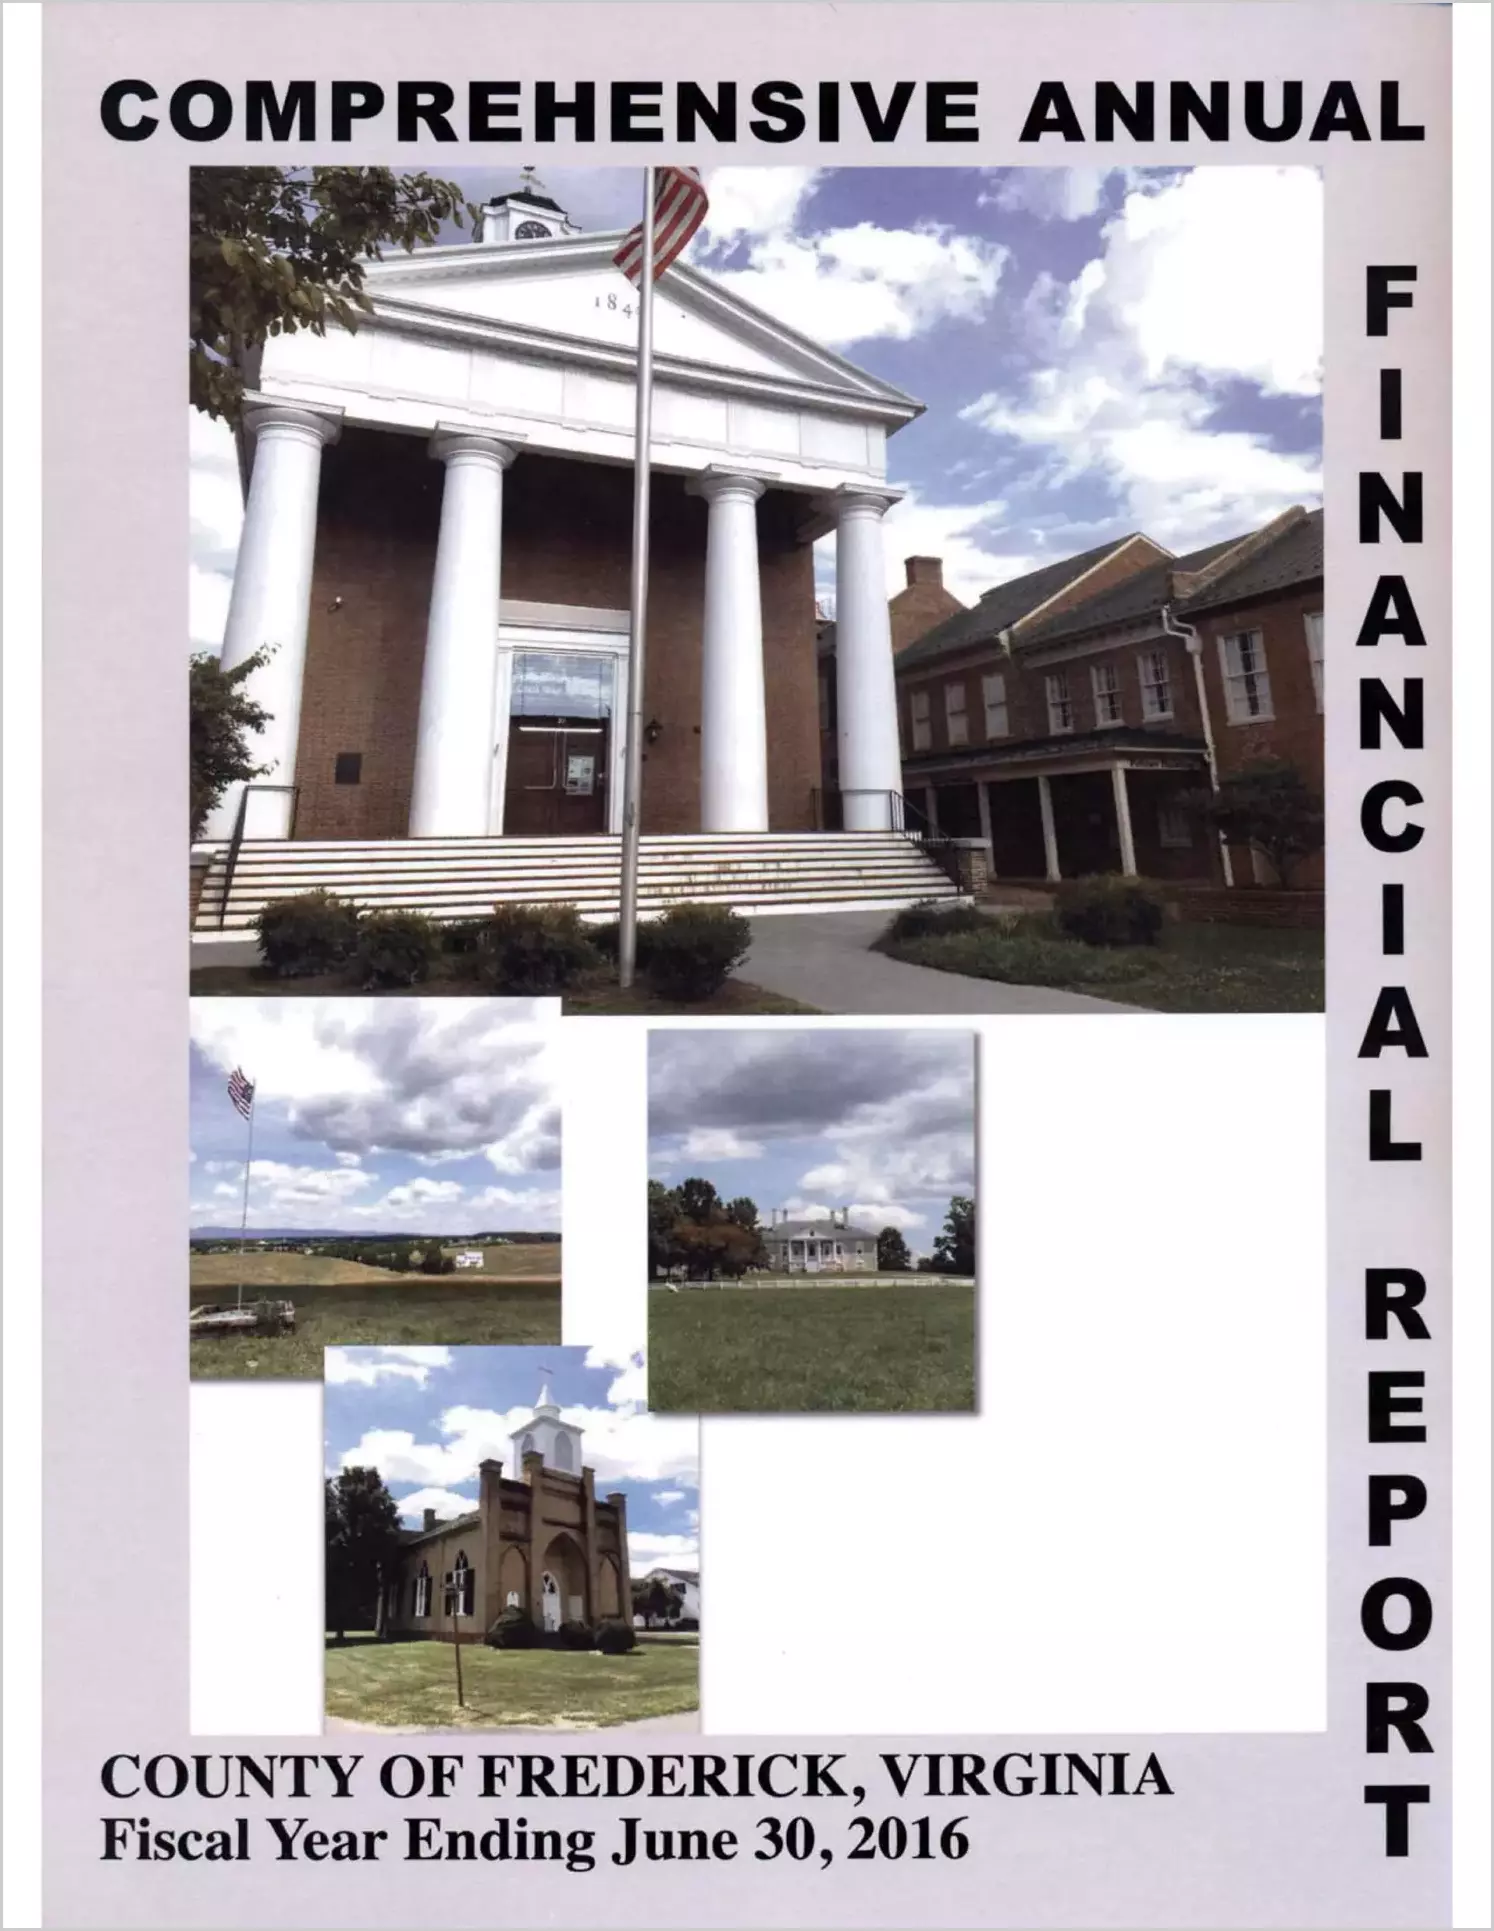 2016 Annual Financial Report for County of Frederick